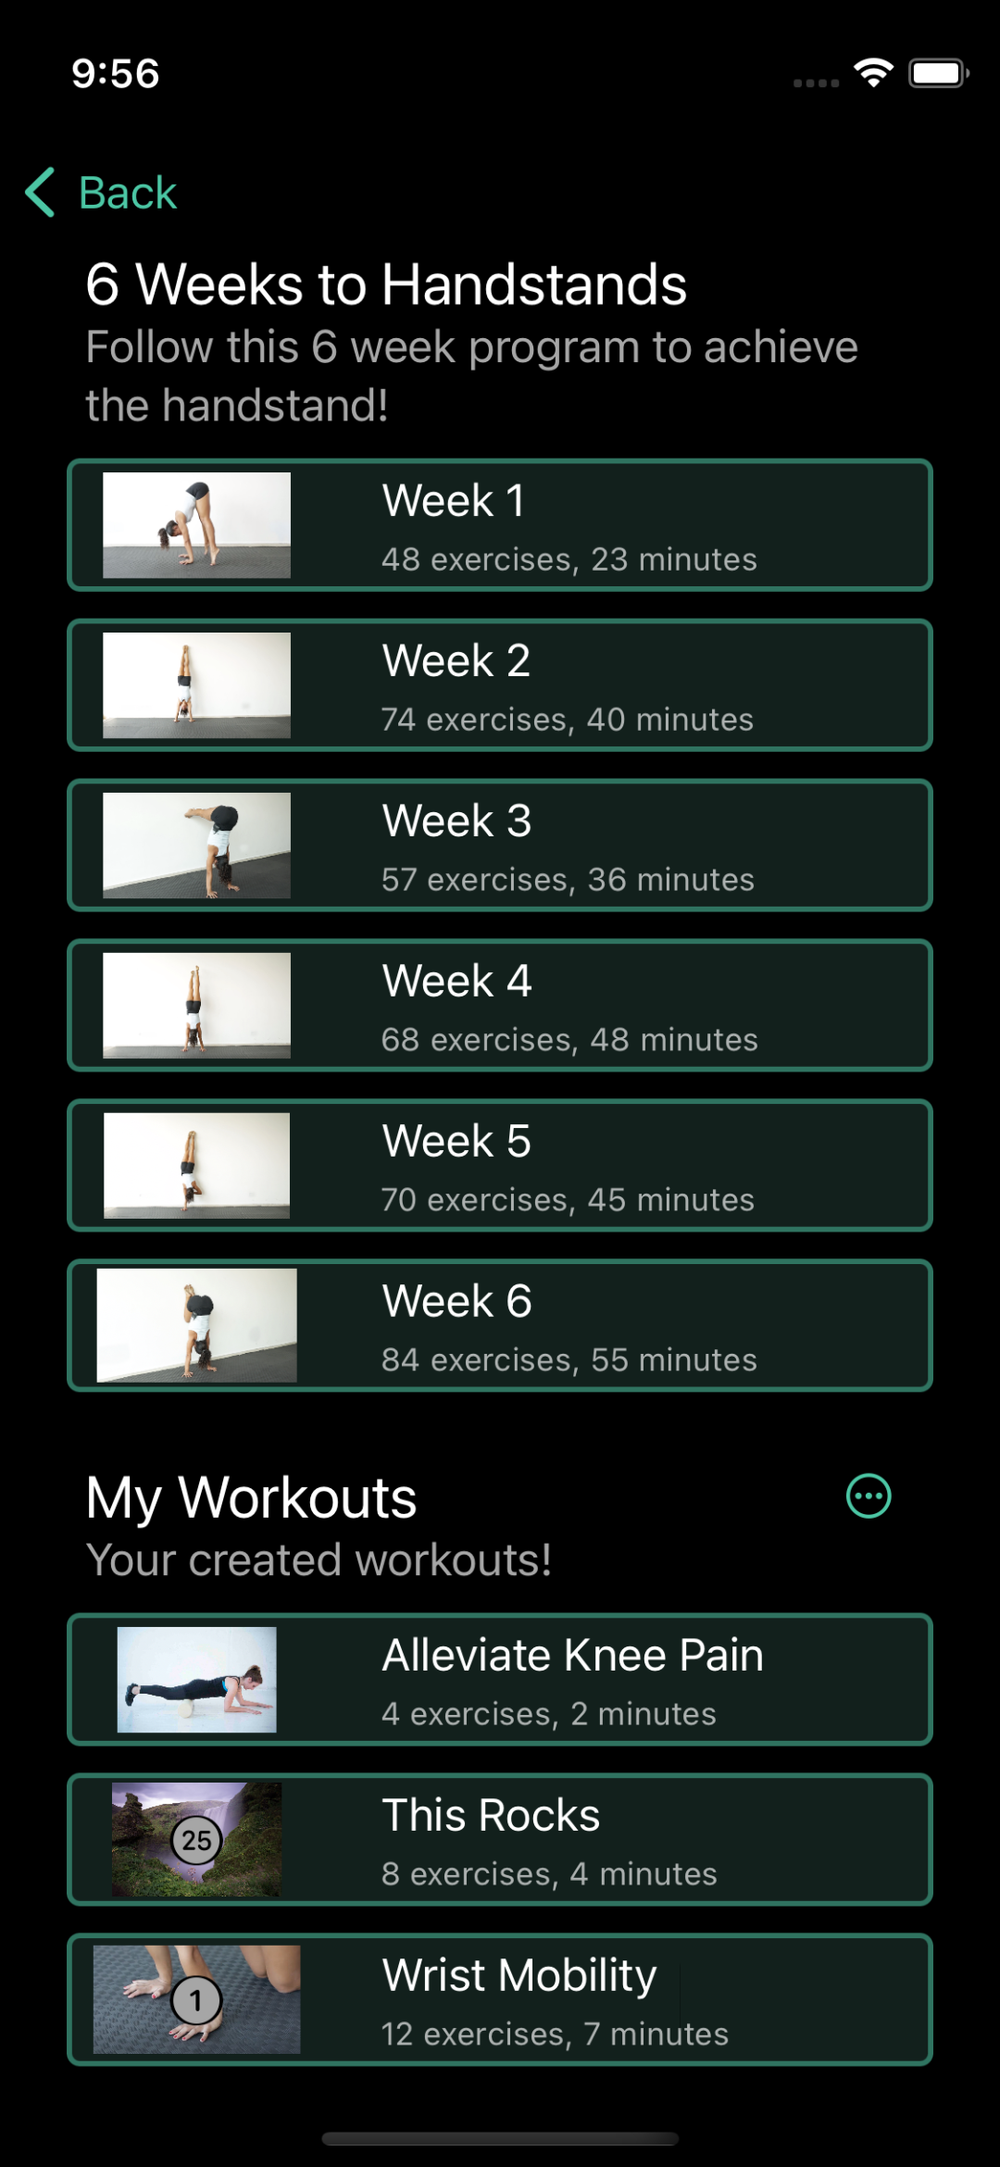 Workout list to pick from, including custom workout